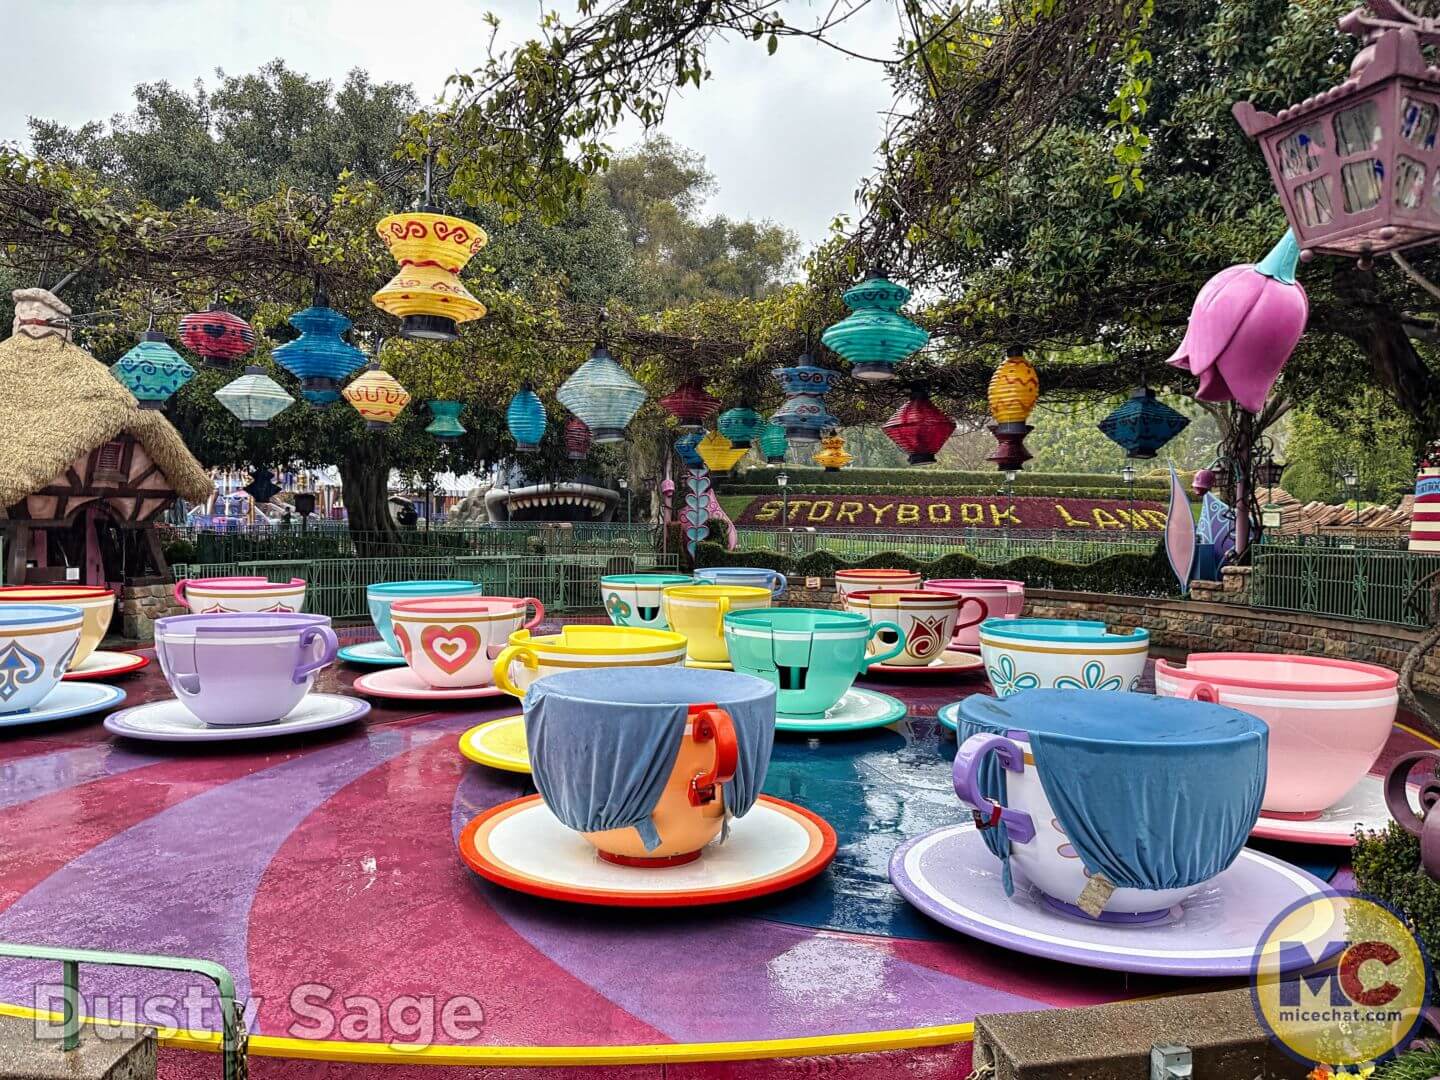 PHOTOS: NEW “Alice in Wonderland” Tea Cup Mug and Folding Fan Available in  Downtown Disney District - Disneyland News Today